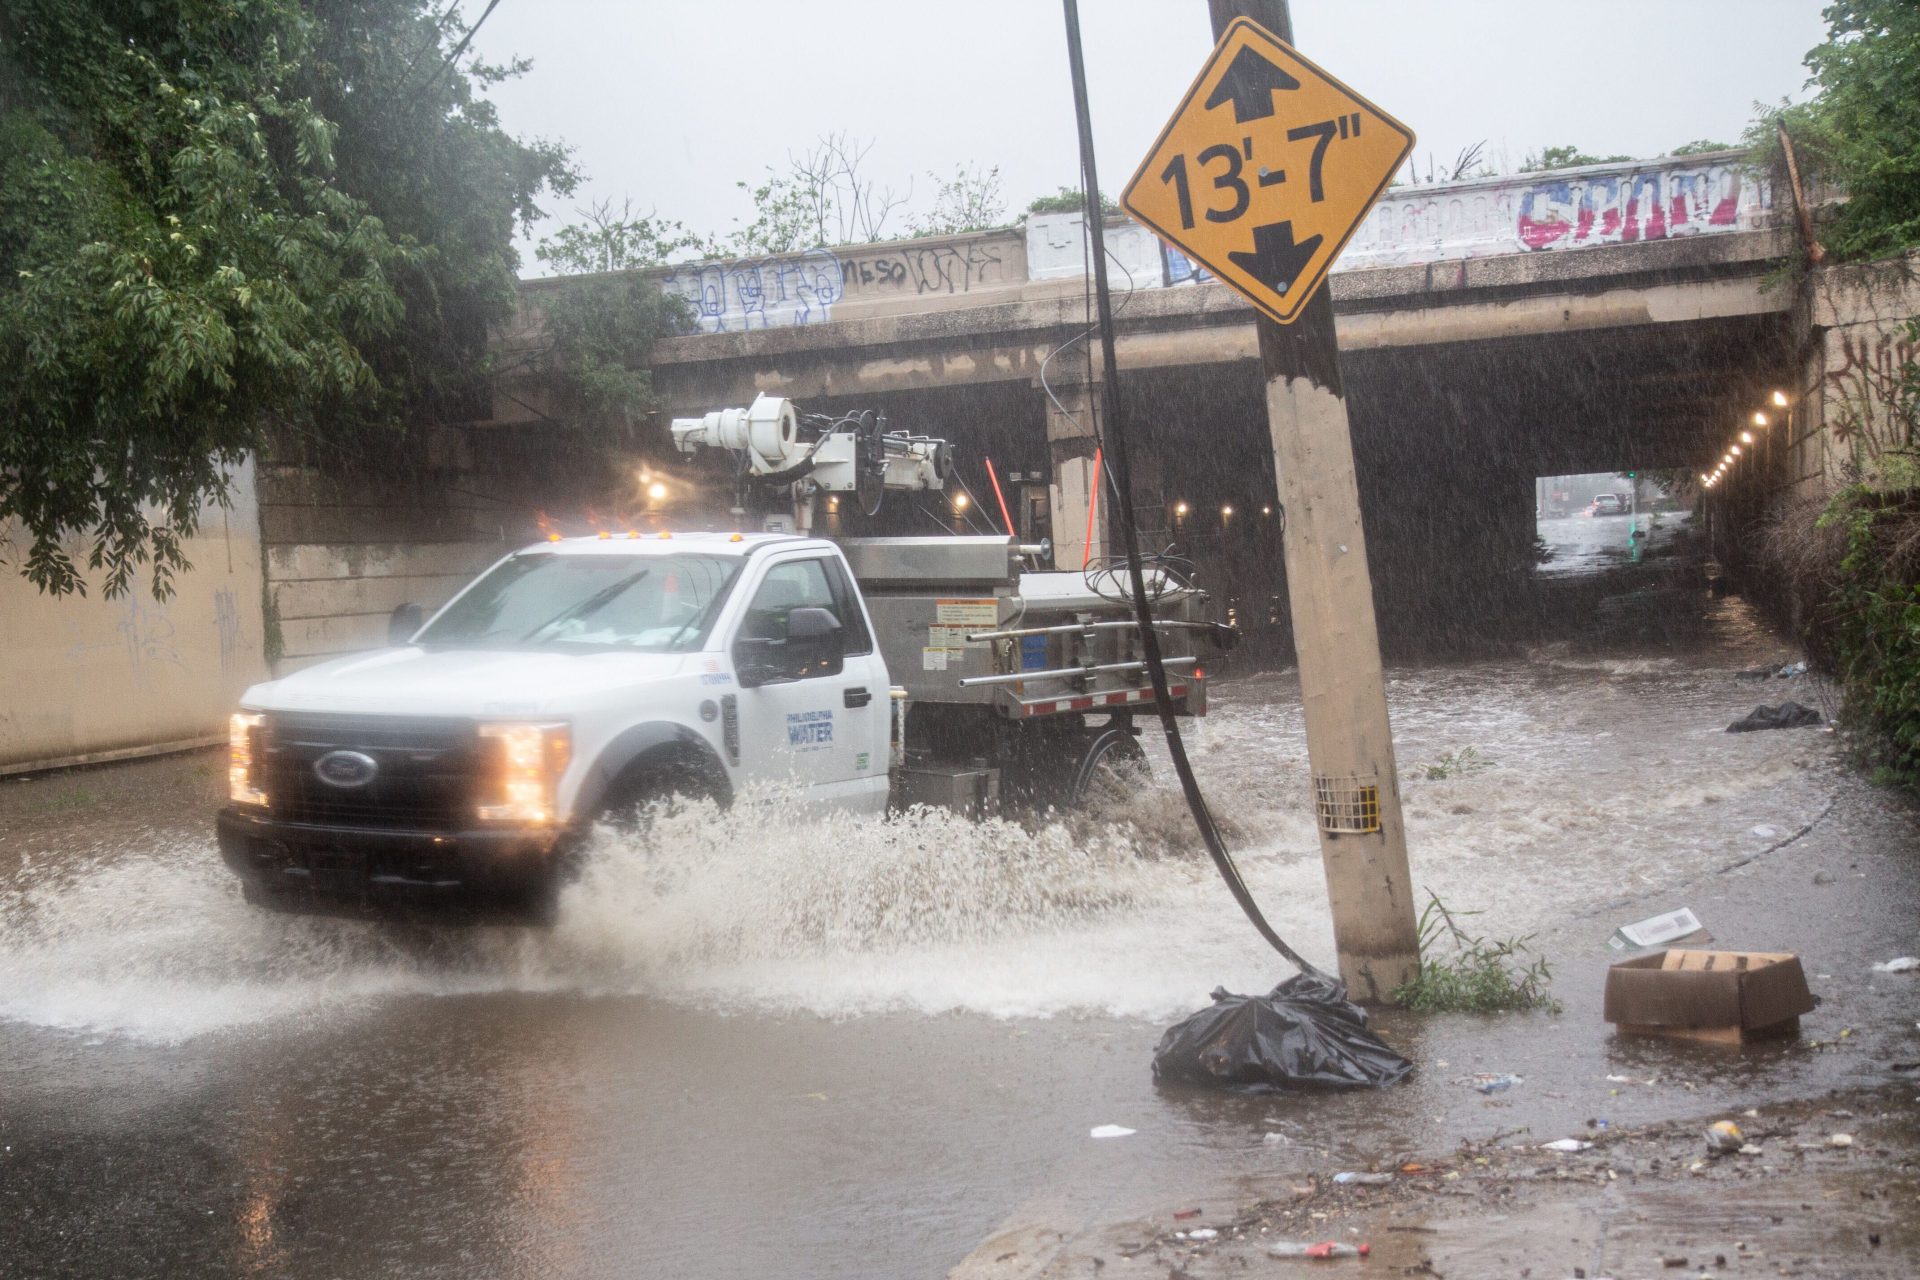 A Philadelphia Water Department Vehicle closes down flooded Tulip and Lehigh streets during Tropical Storm Isaias in Philadelphia.